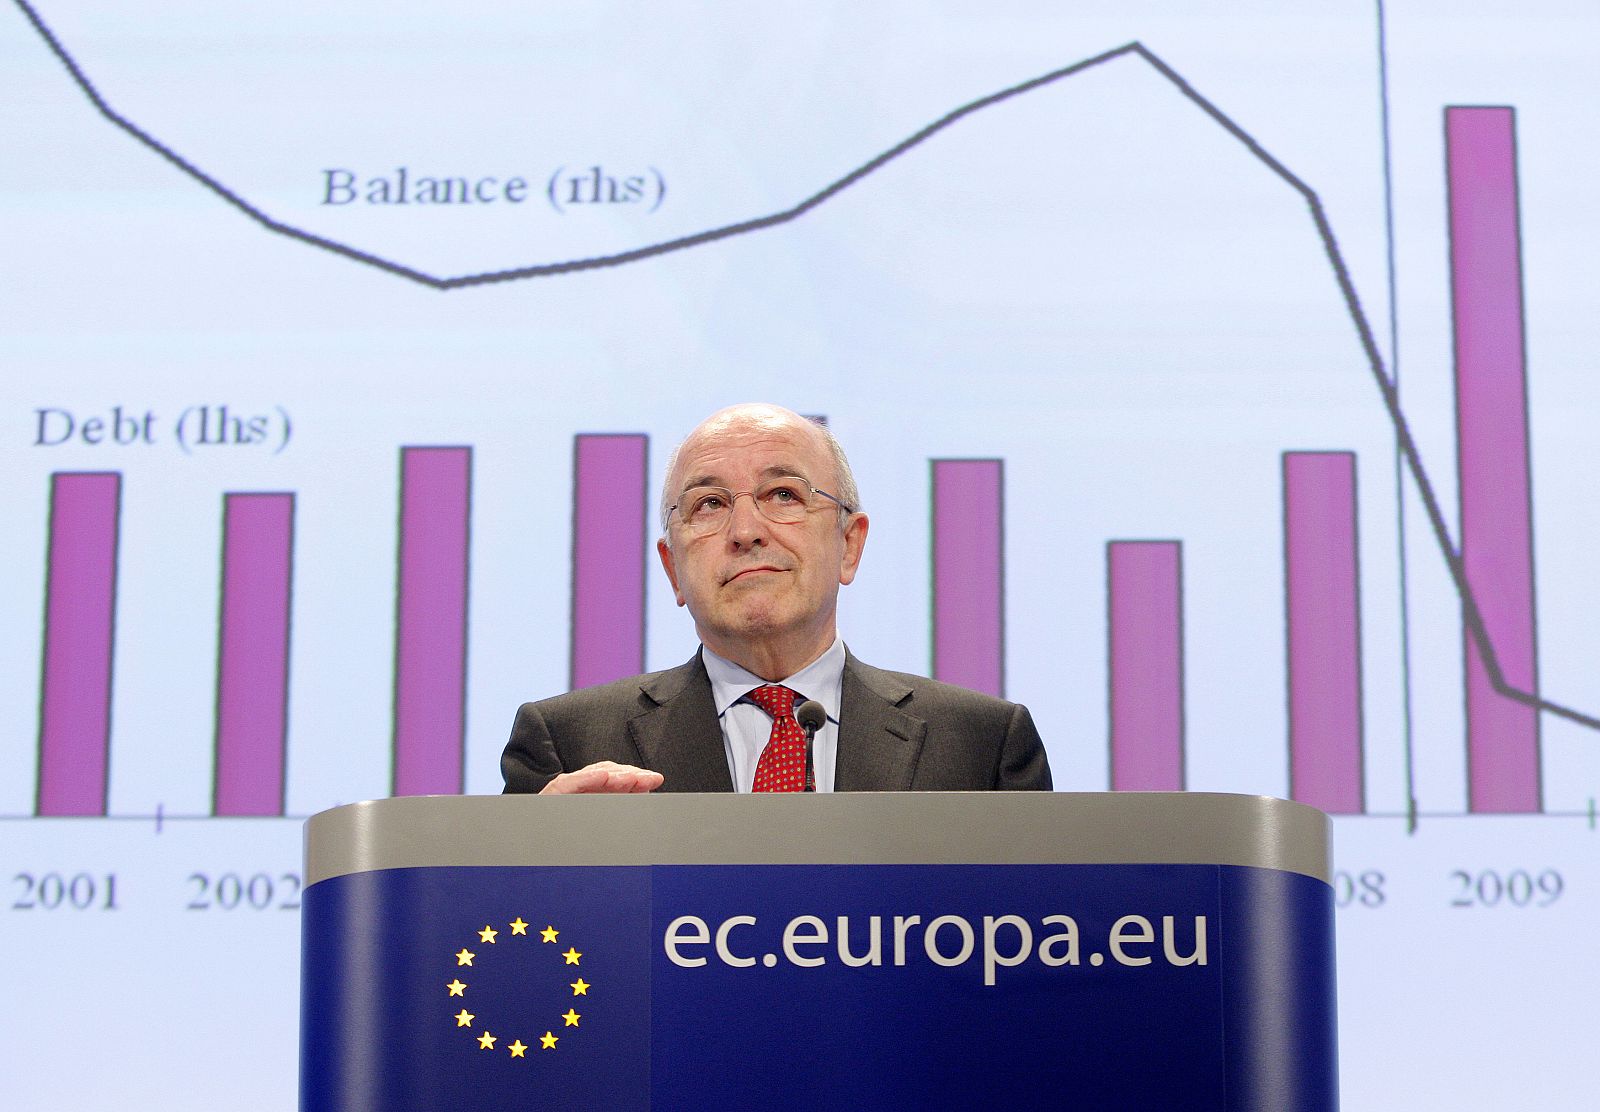 European Economic and Monetary Affairs Commissioner Joaquin Almunia gestures during a news conference in Brussels